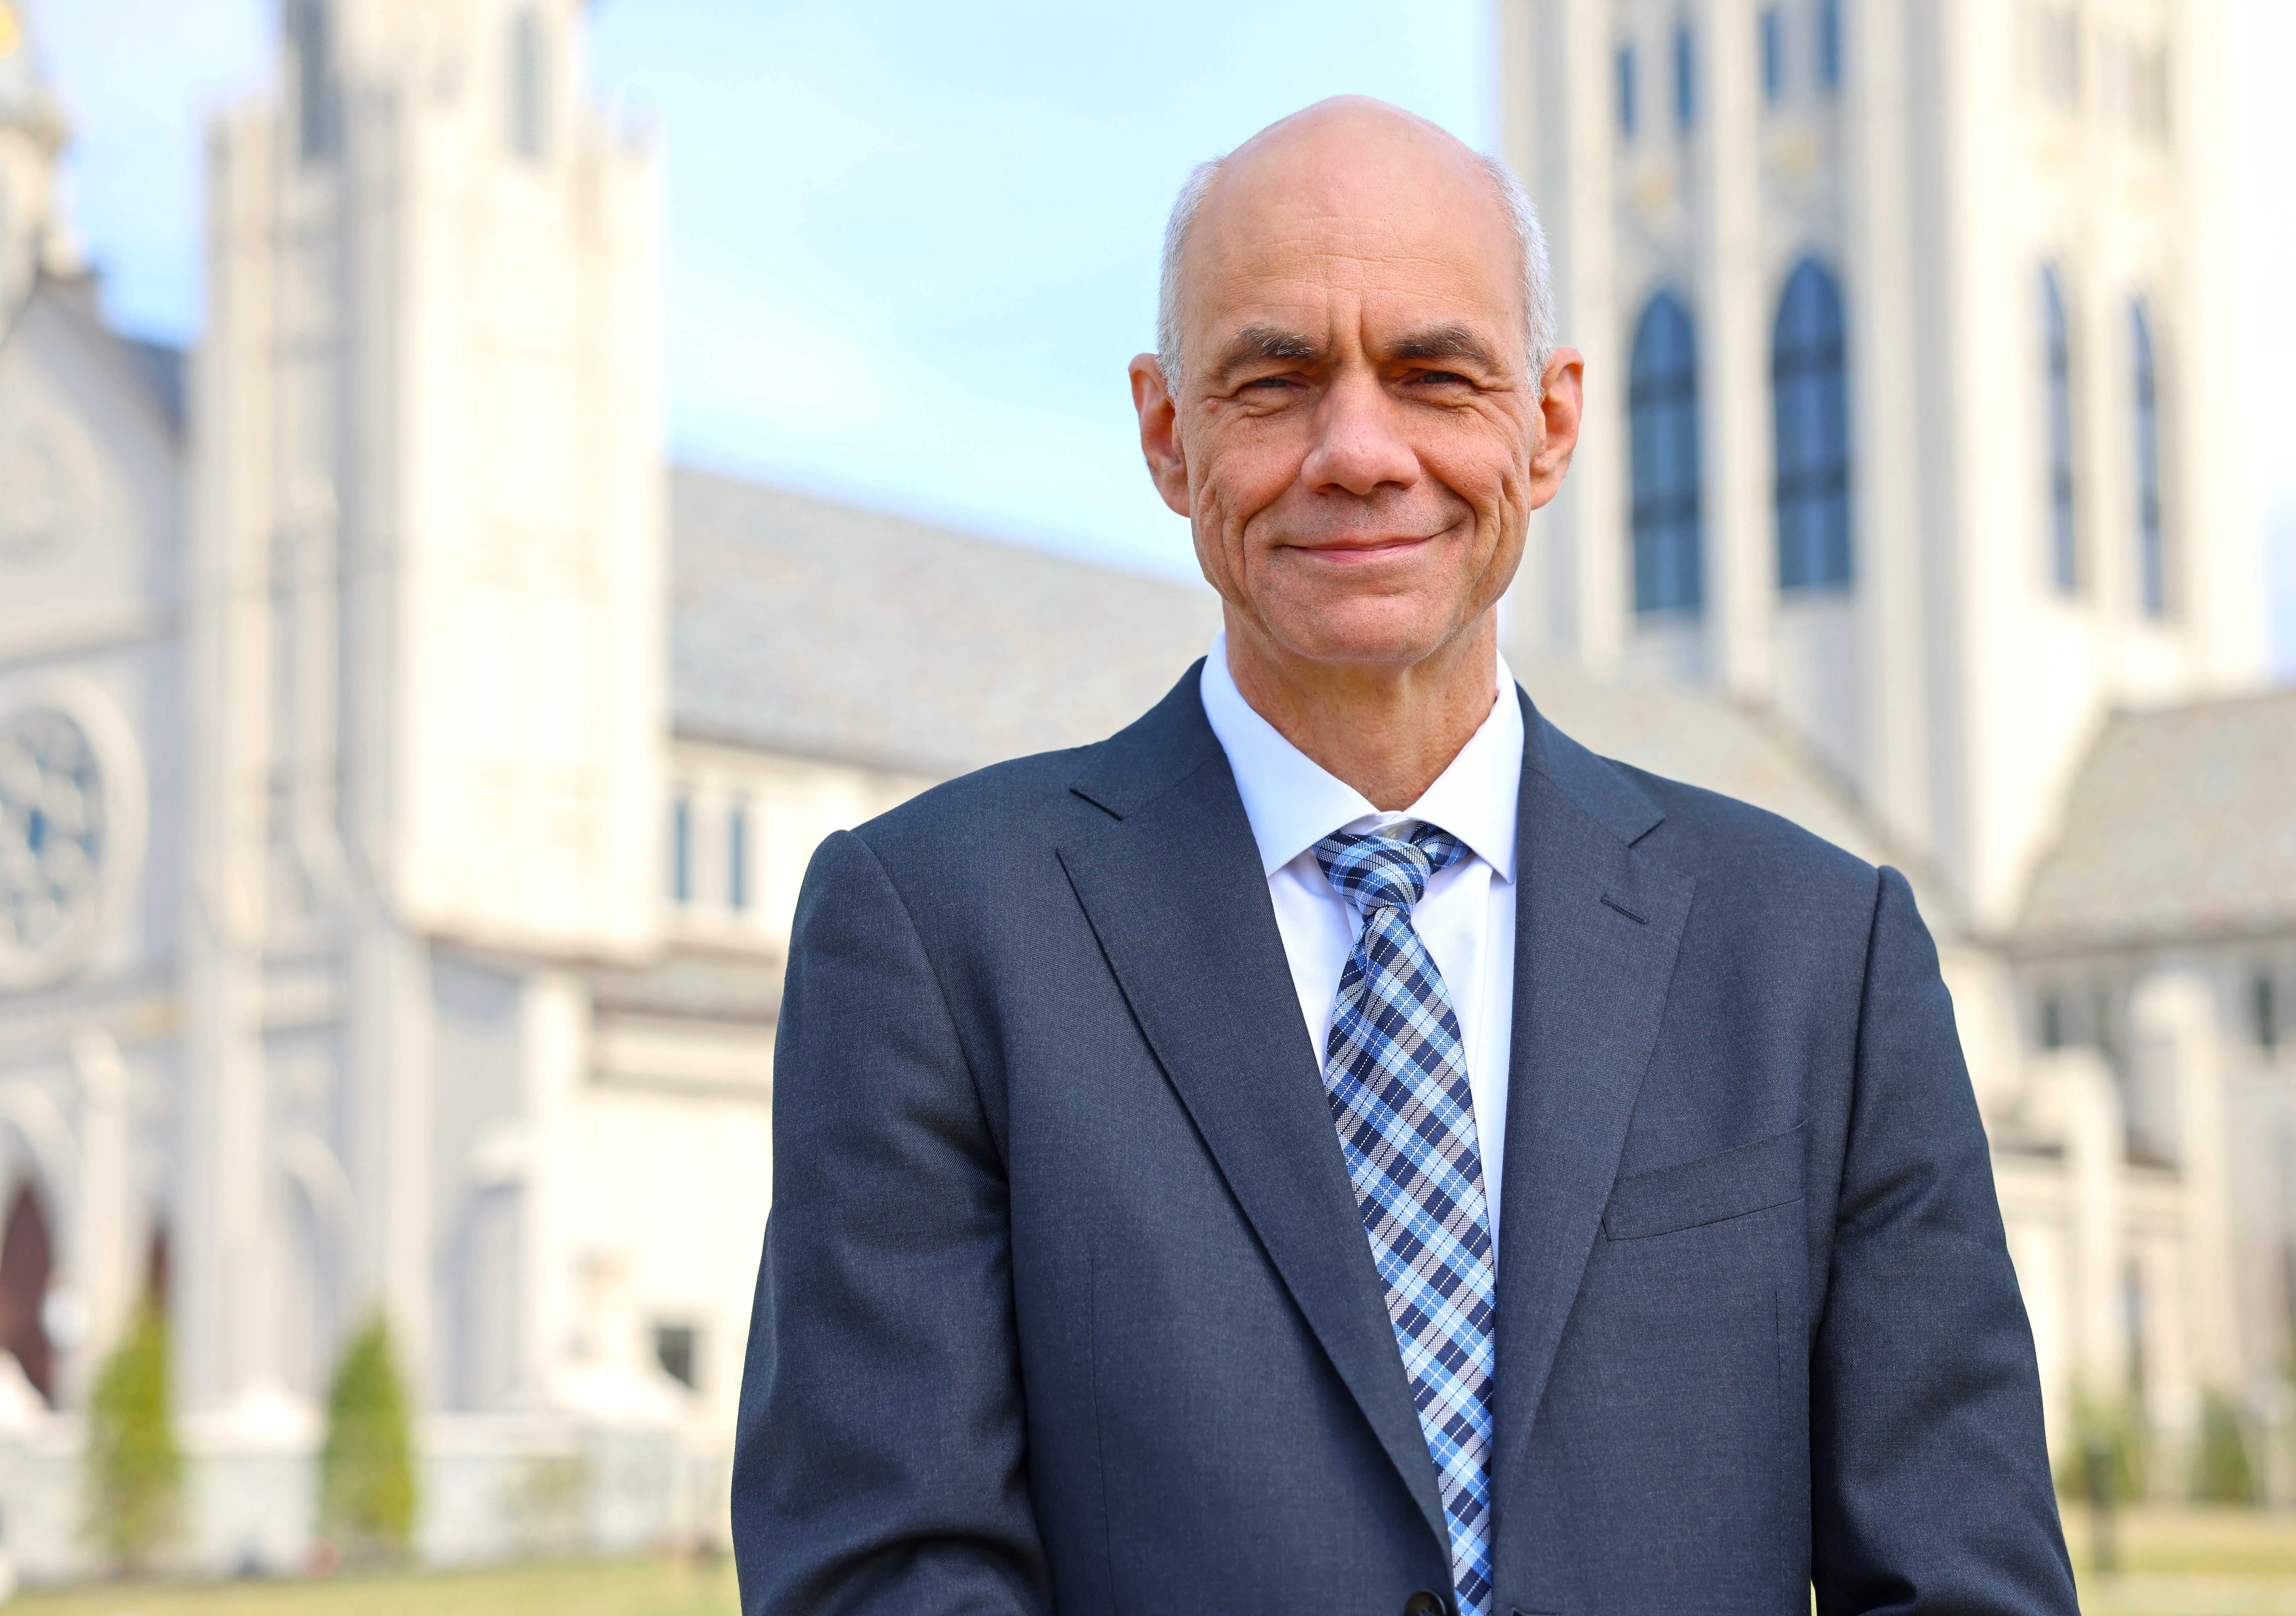 Christendom’s president-elect, George Harne, is currently a professor at the University of St. Thomas in Houston. Before then, he served as president of Magdalen College of the Liberal Arts for nine years.?w=200&h=150